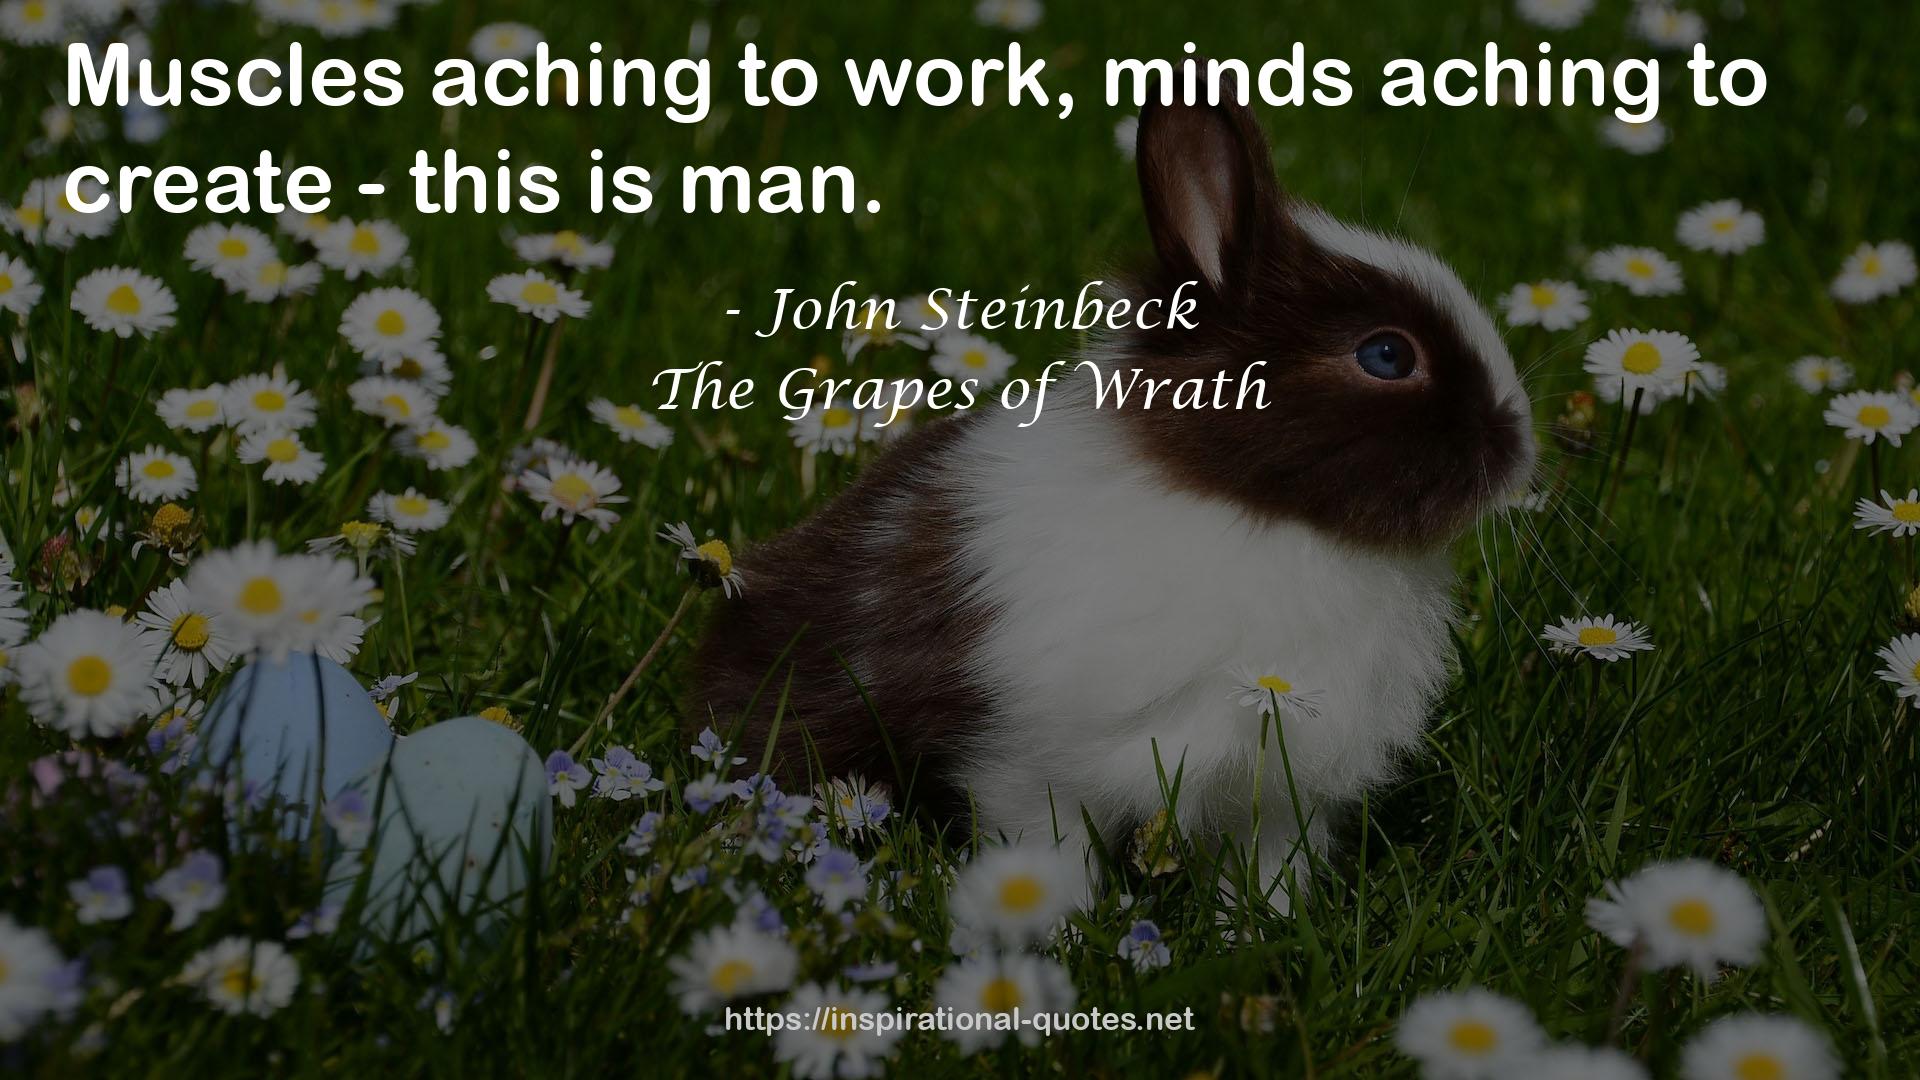 The Grapes of Wrath QUOTES